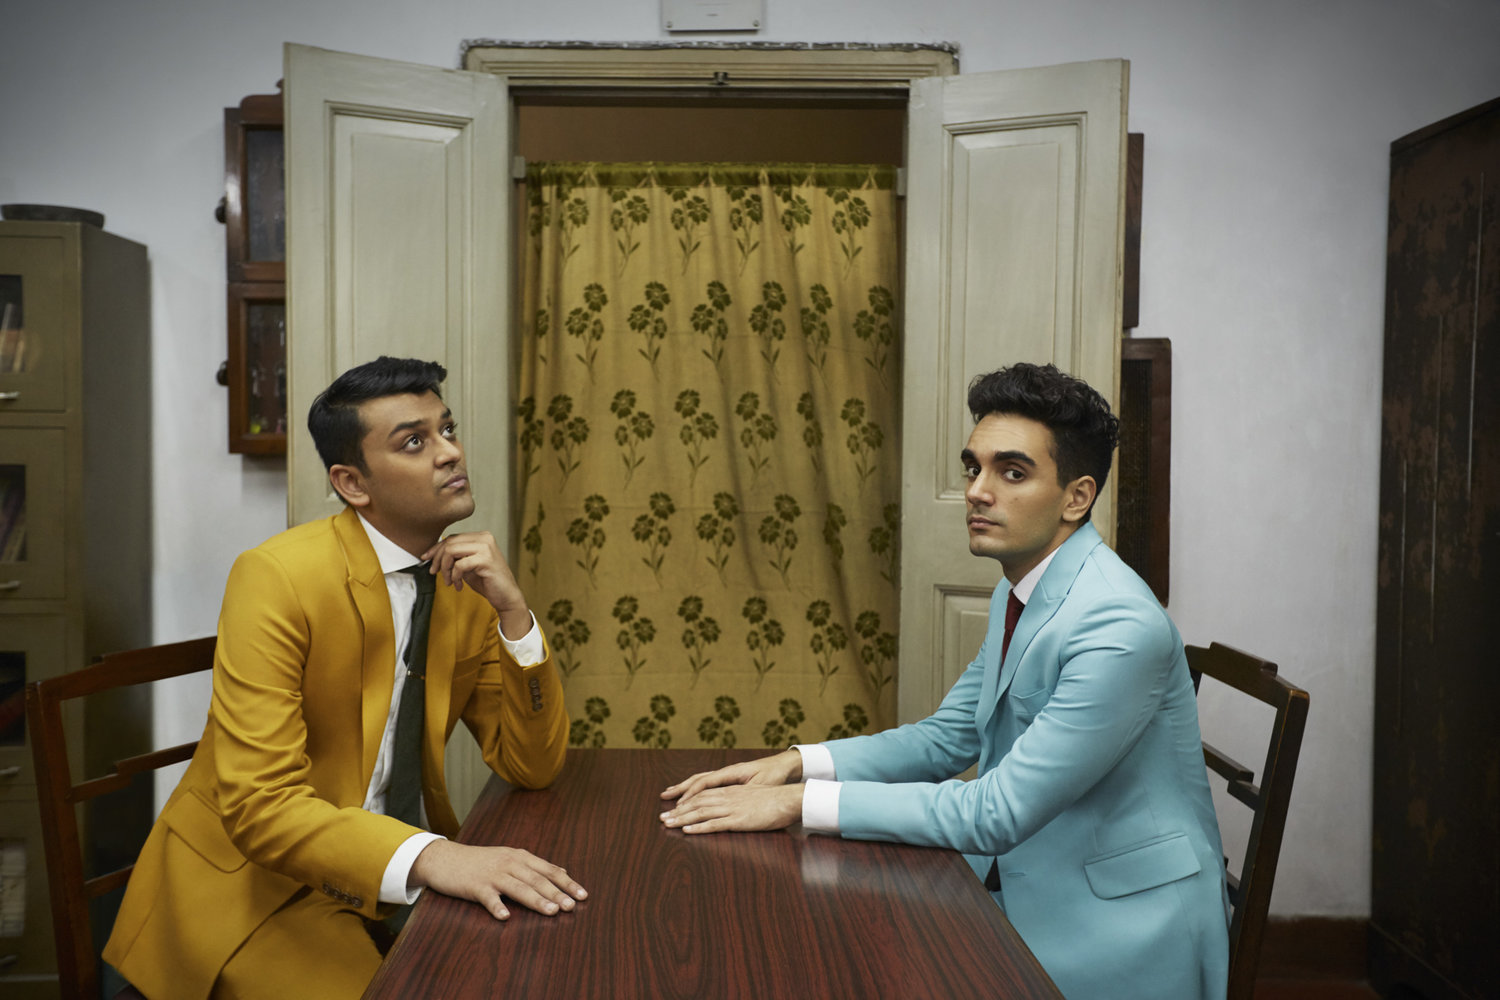 Parekh & Singh are the fresh new sound of India. Get to know the duo behind the dreamy pop vocals and optimistic, Wes Anderson-esque visuals on The Rhapsody.